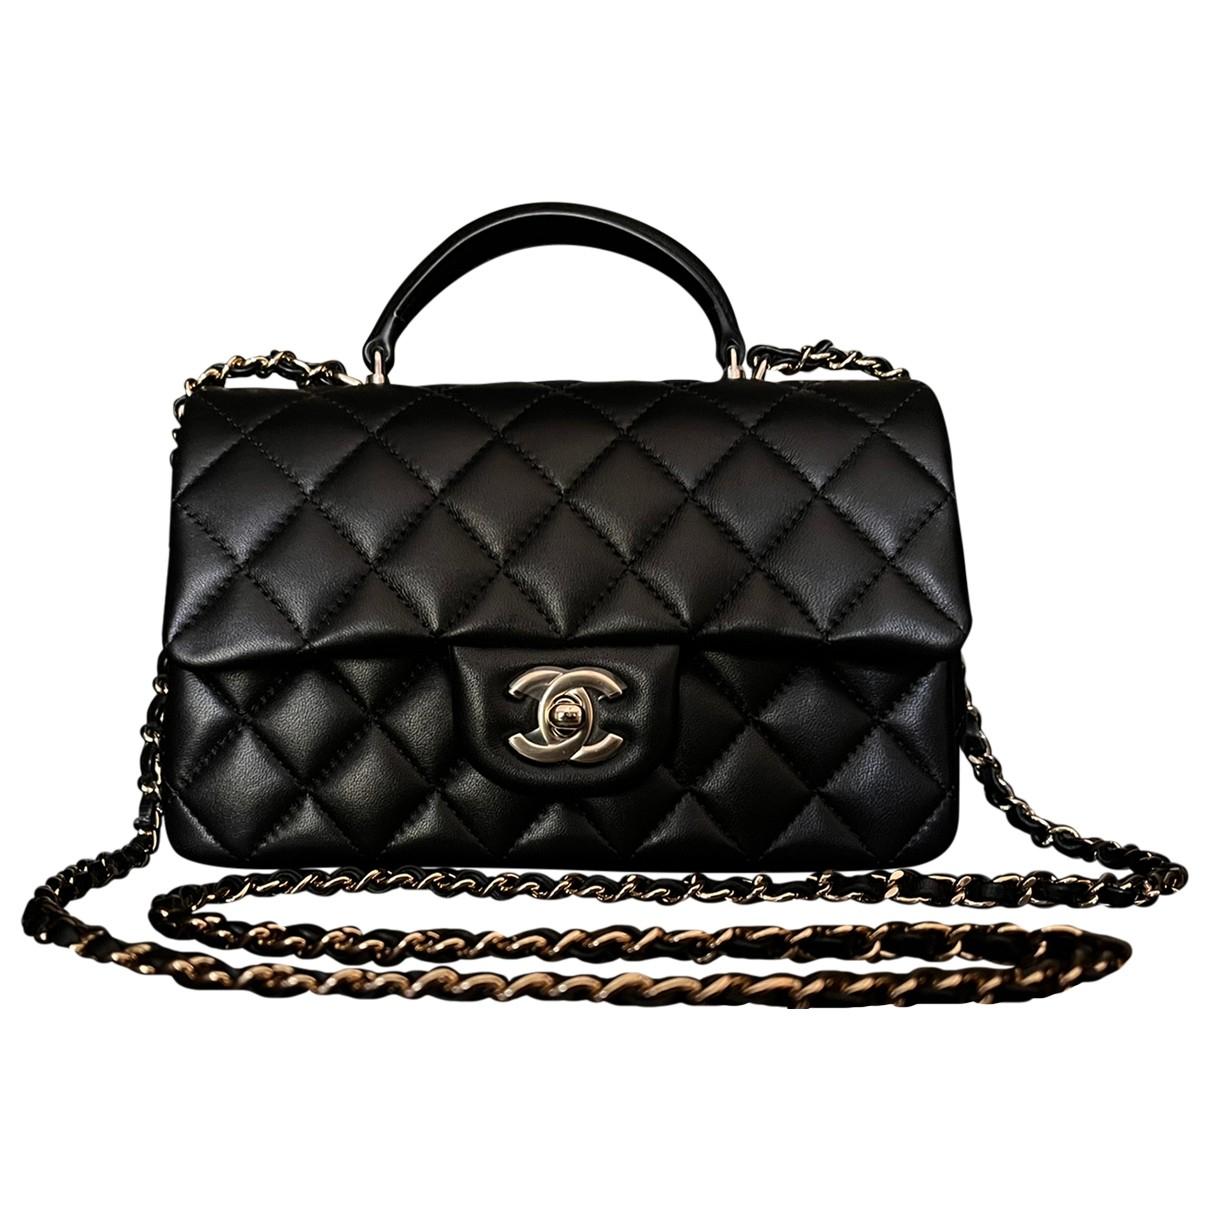 Timeless/classique leather handbag Chanel Black in Leather - 29537282